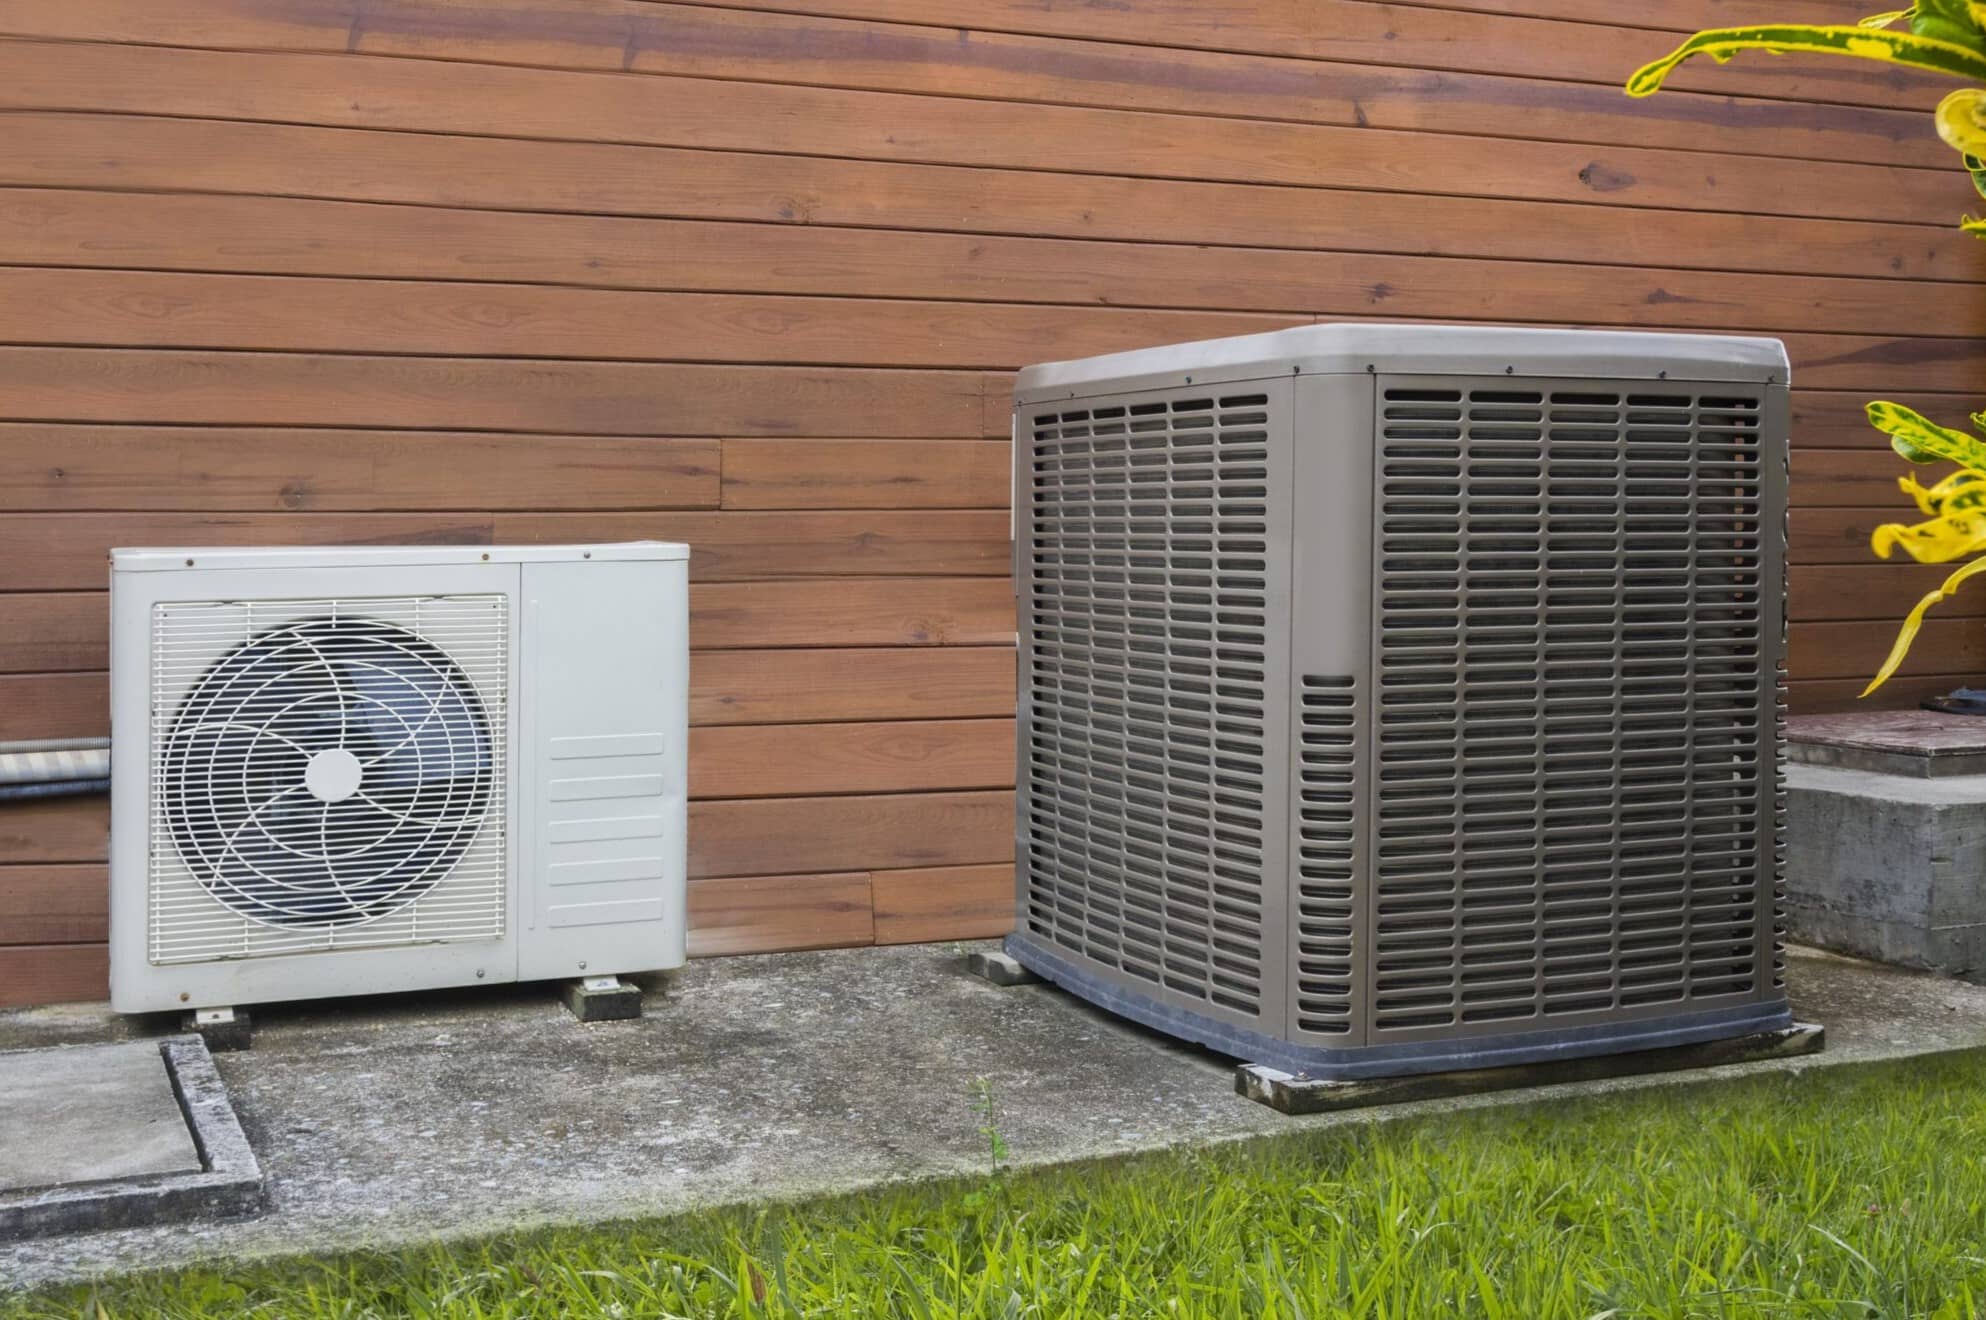 How Much Does An Air Conditioner Cost For A 2,500 Sq Ft Home